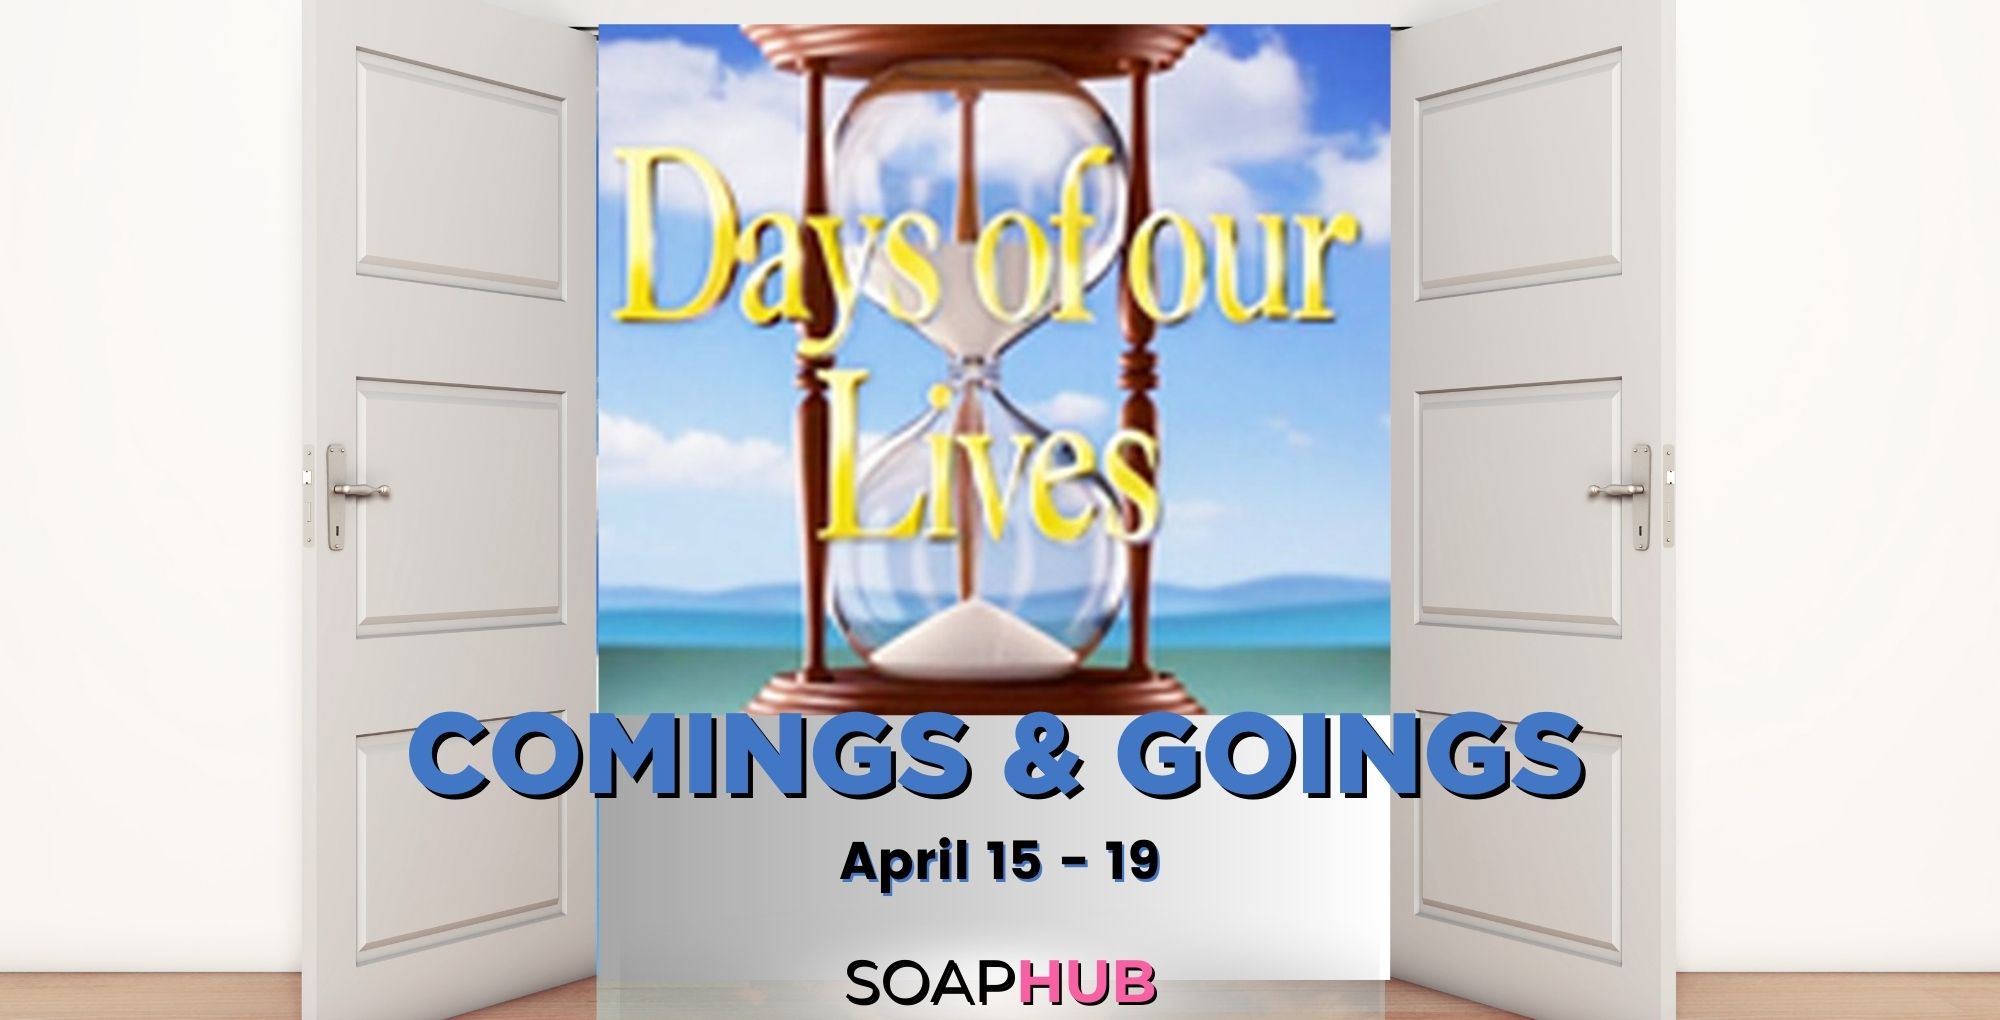 Days of our Lives comings and goings for the week of April 19 with the Soap Hub logo across the bottom.